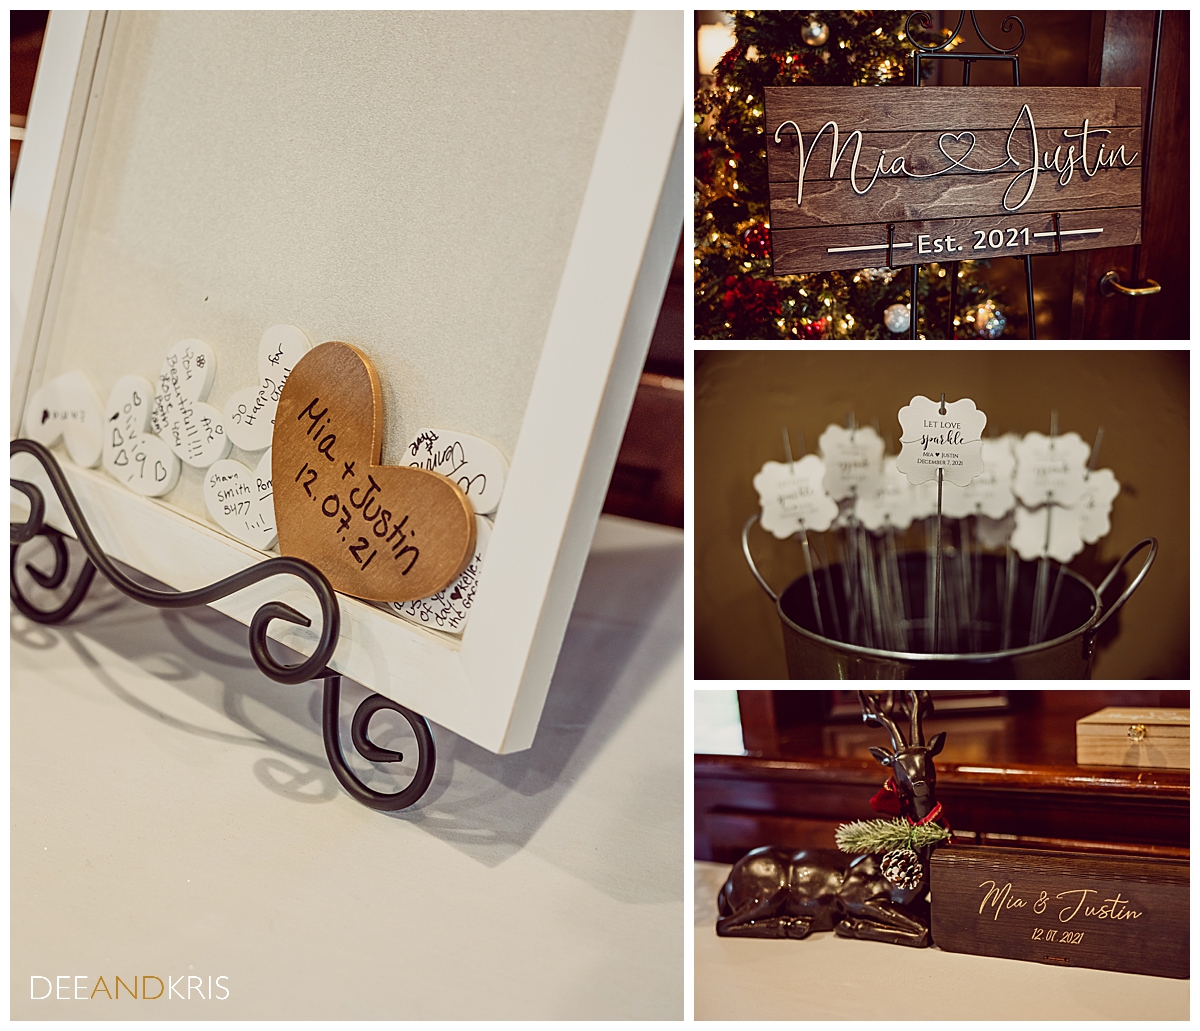 Four images of various wedding details and signs.